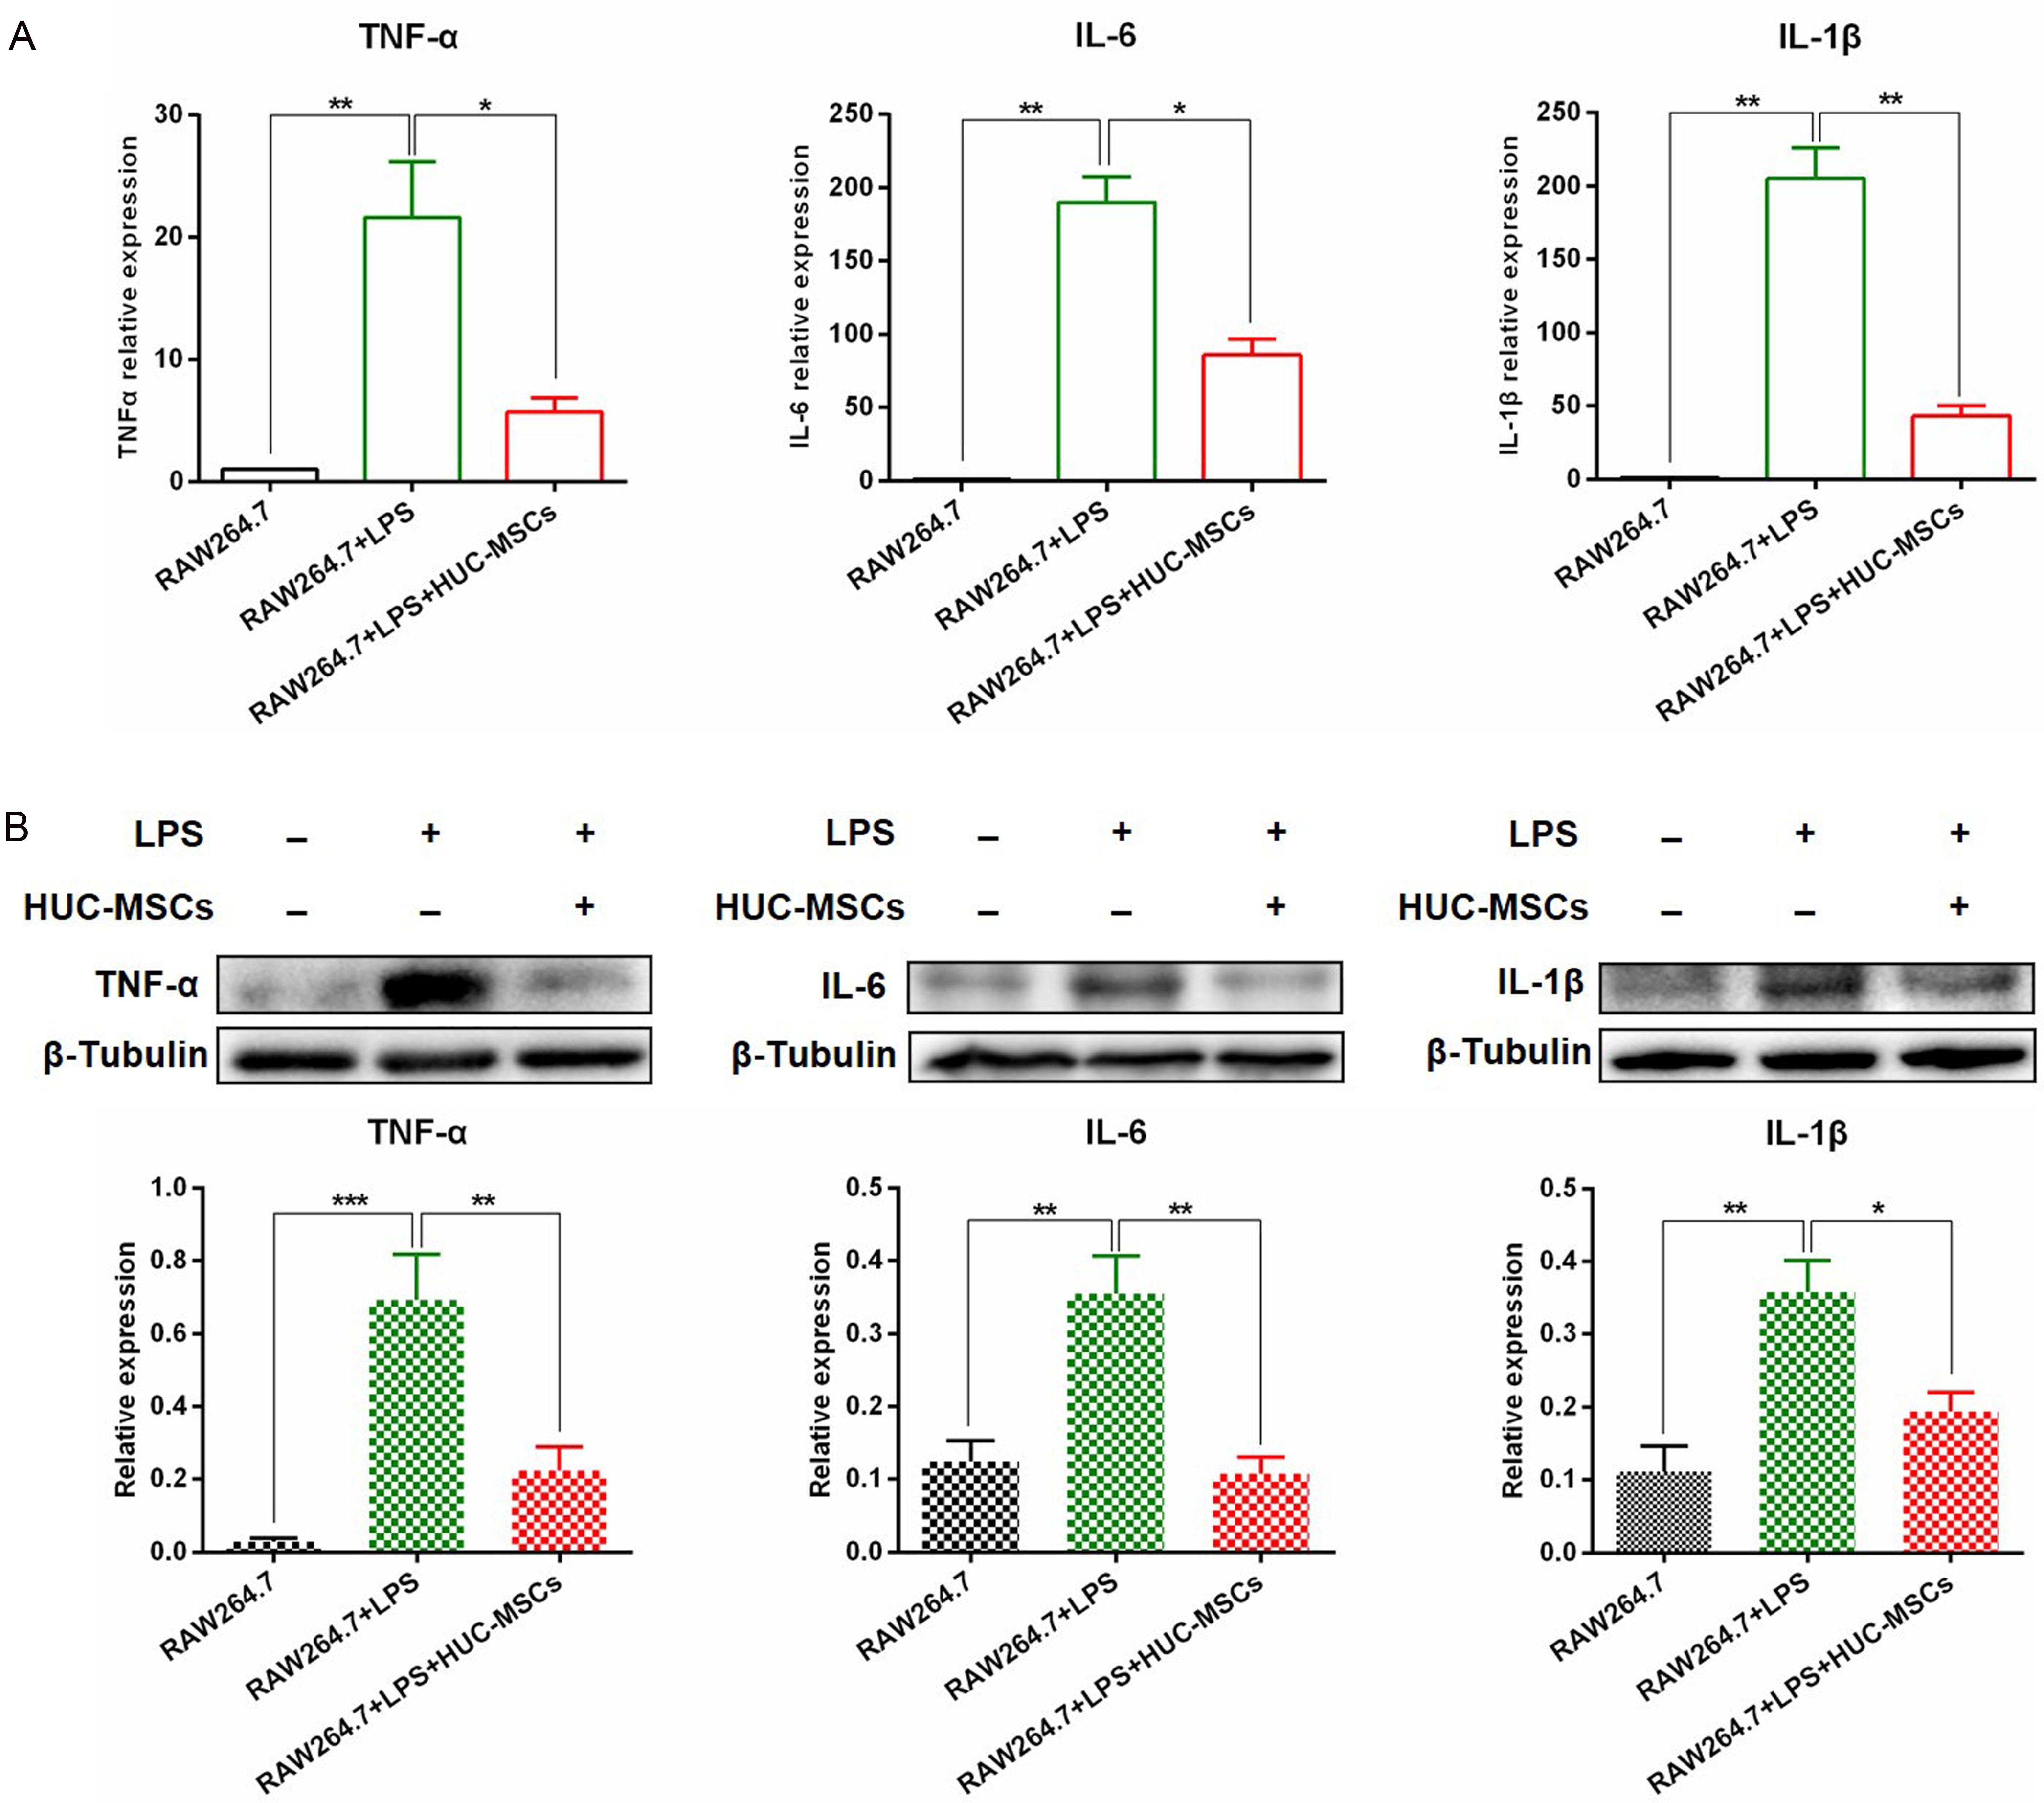 The hUC-MSCs co-culture reduced inflammatory cytokine levels in LPS-treated RAW264.7 cells.